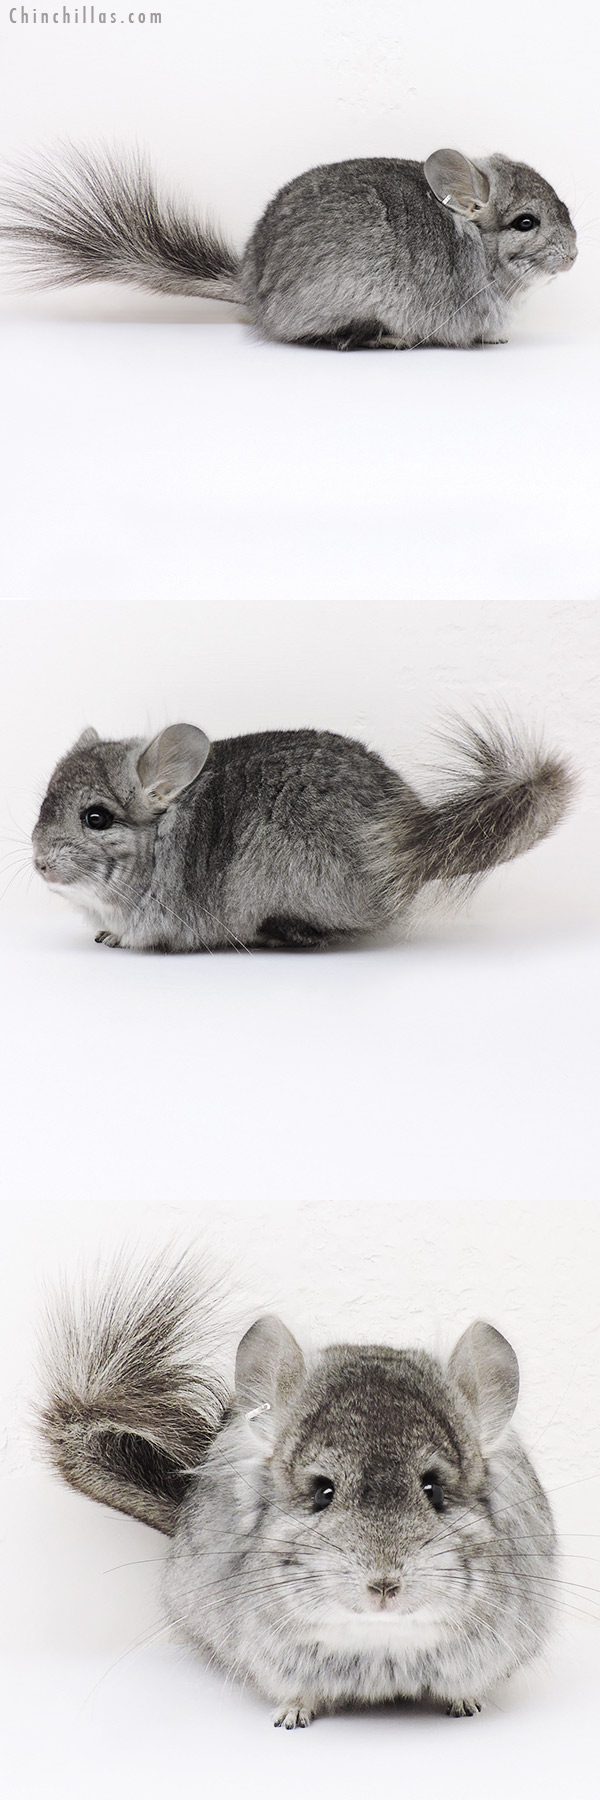 Chinchilla or related item offered for sale or export on Chinchillas.com - 16290 Standard  Royal Persian Angora Male Chinchilla